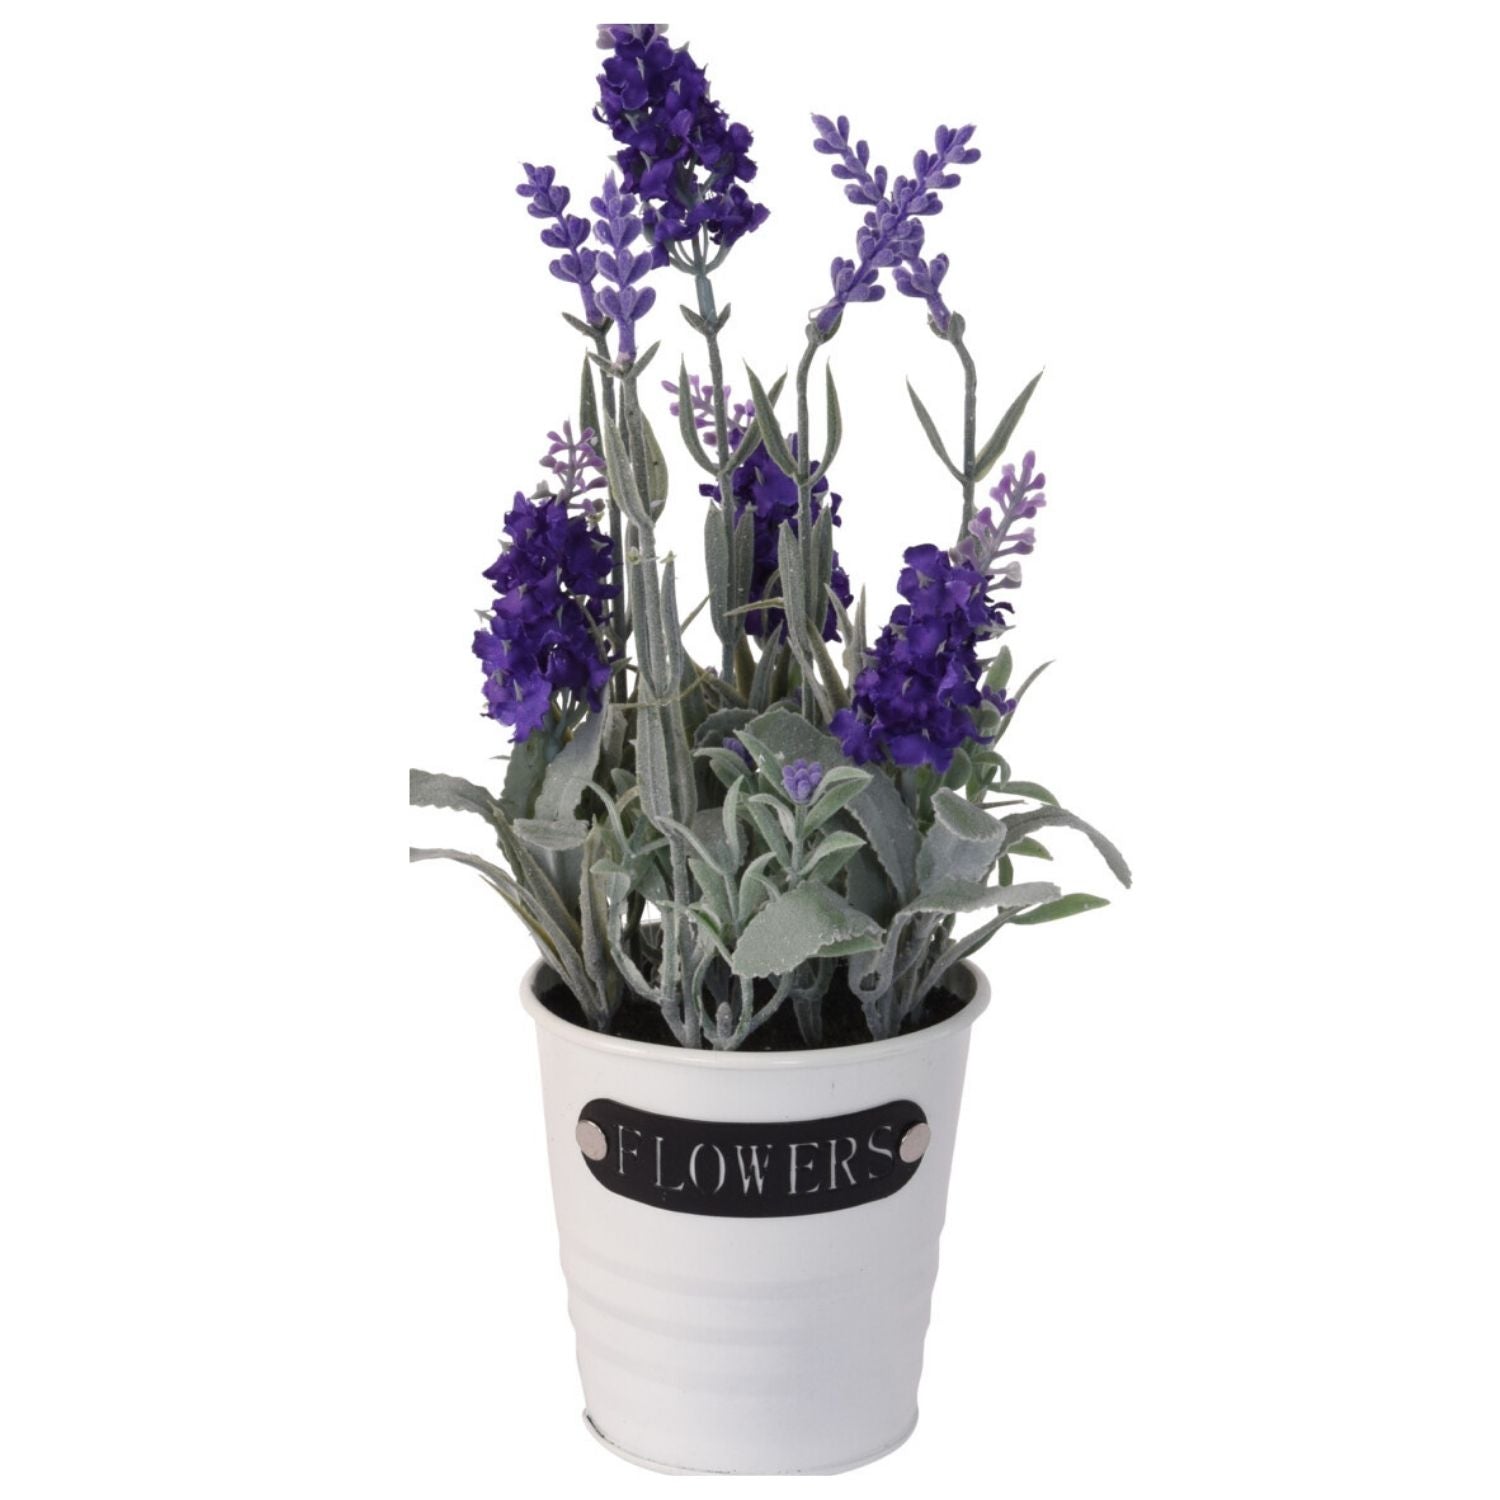 The Home Collection Lavender Plant in a Metal Pot 1 Shaws Department Stores